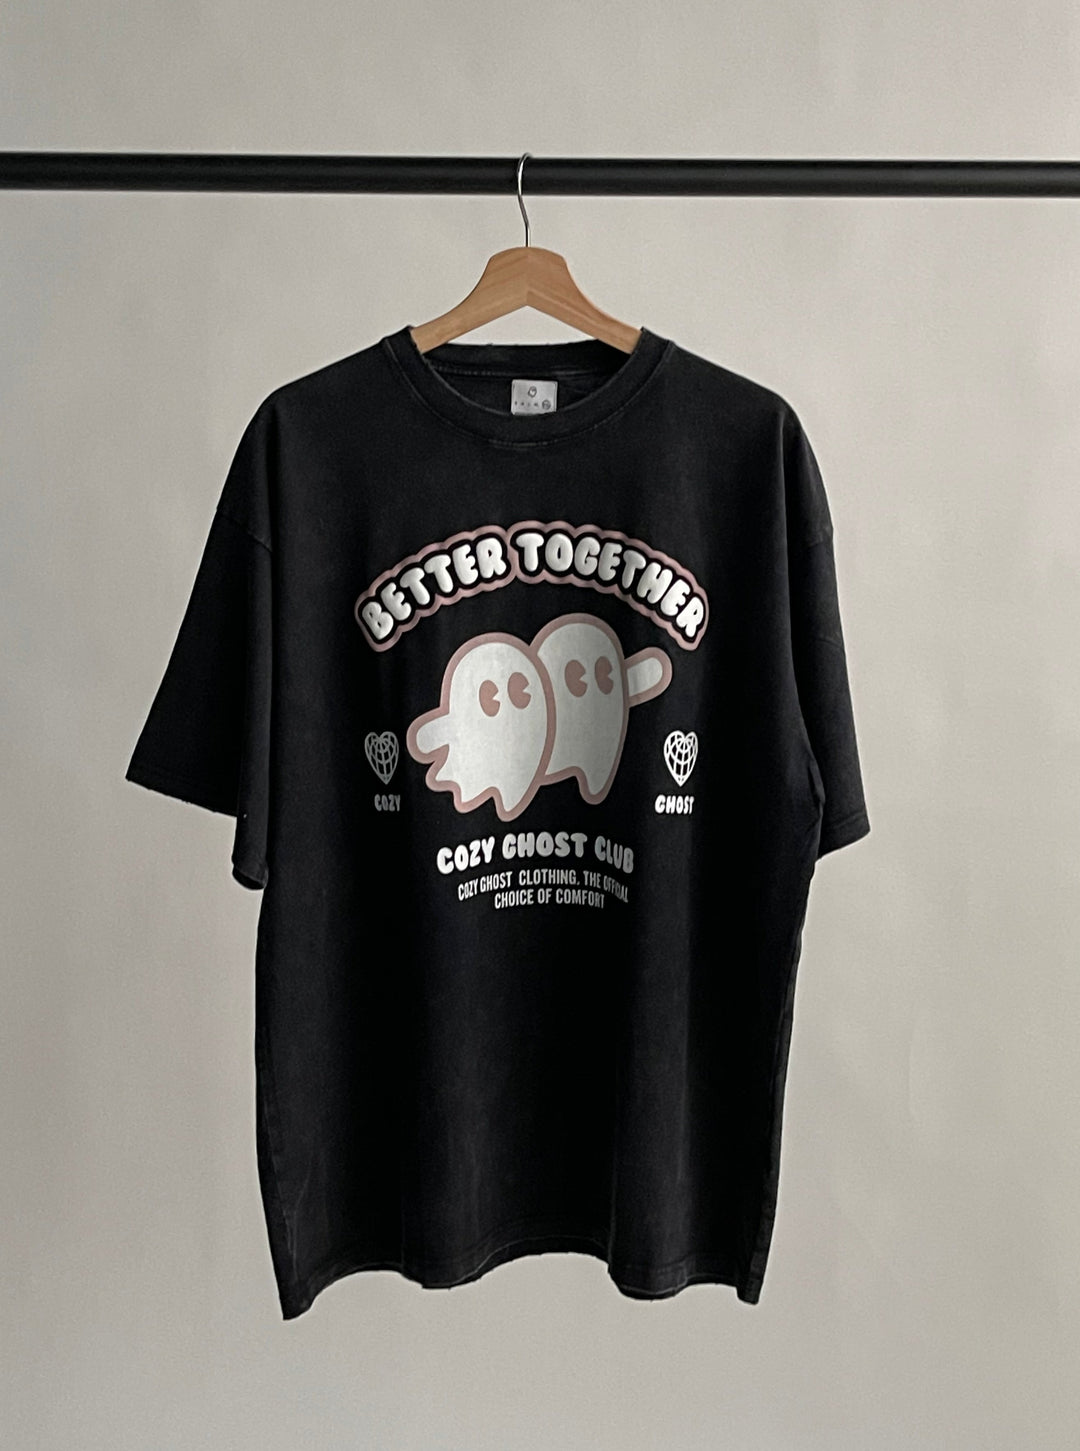 "Better Together" Tee